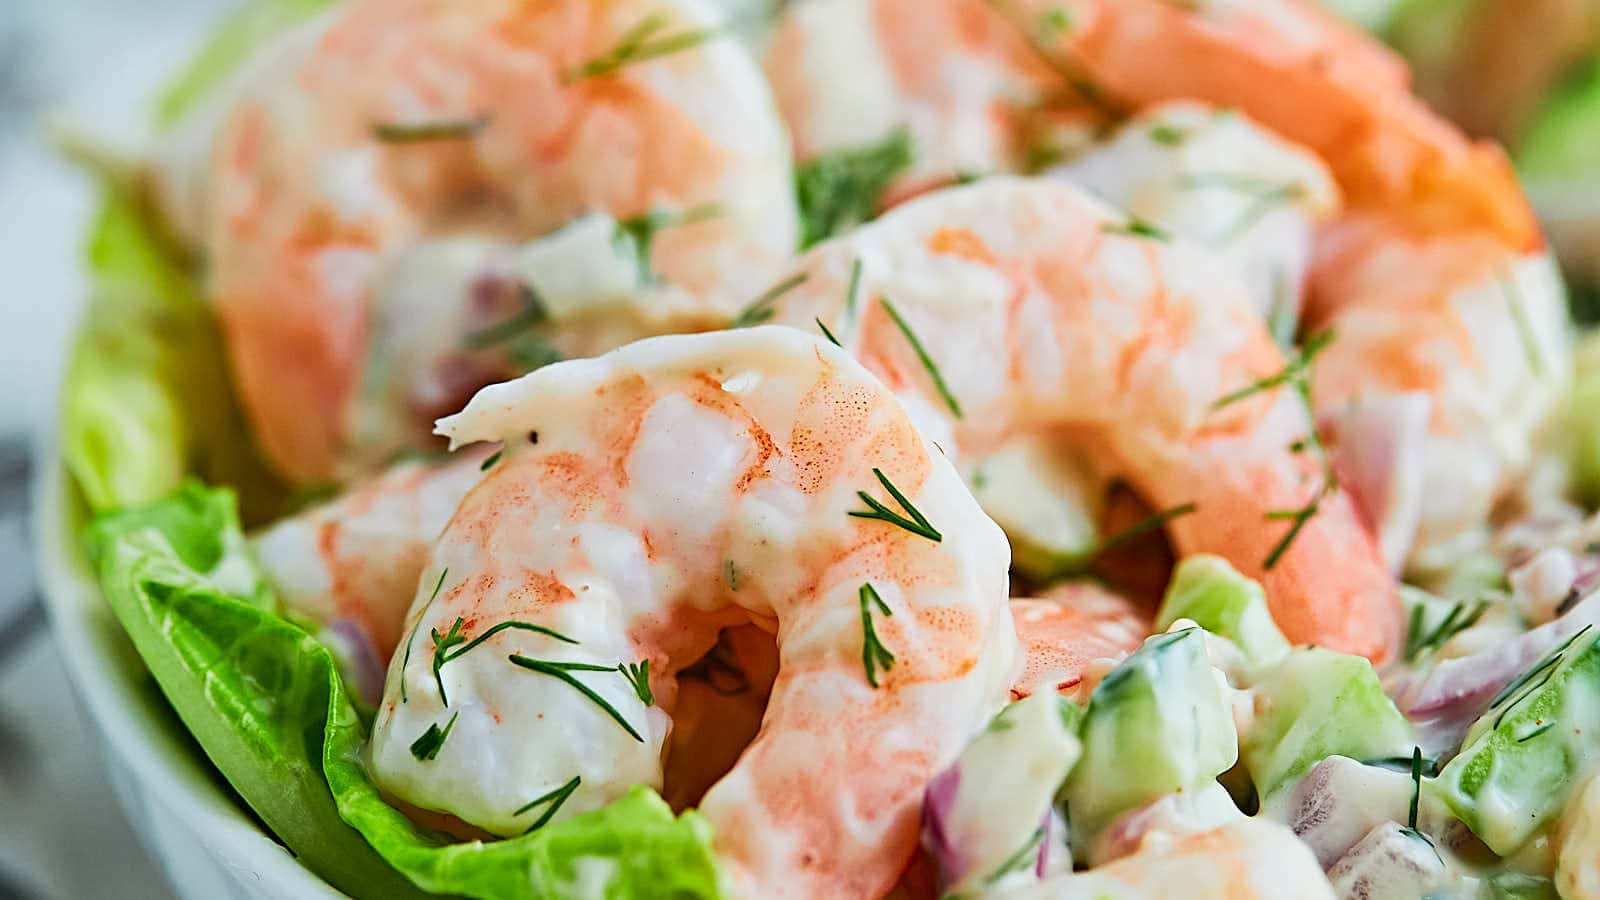 Shrimp Salad recipe by Cheerful Cook.